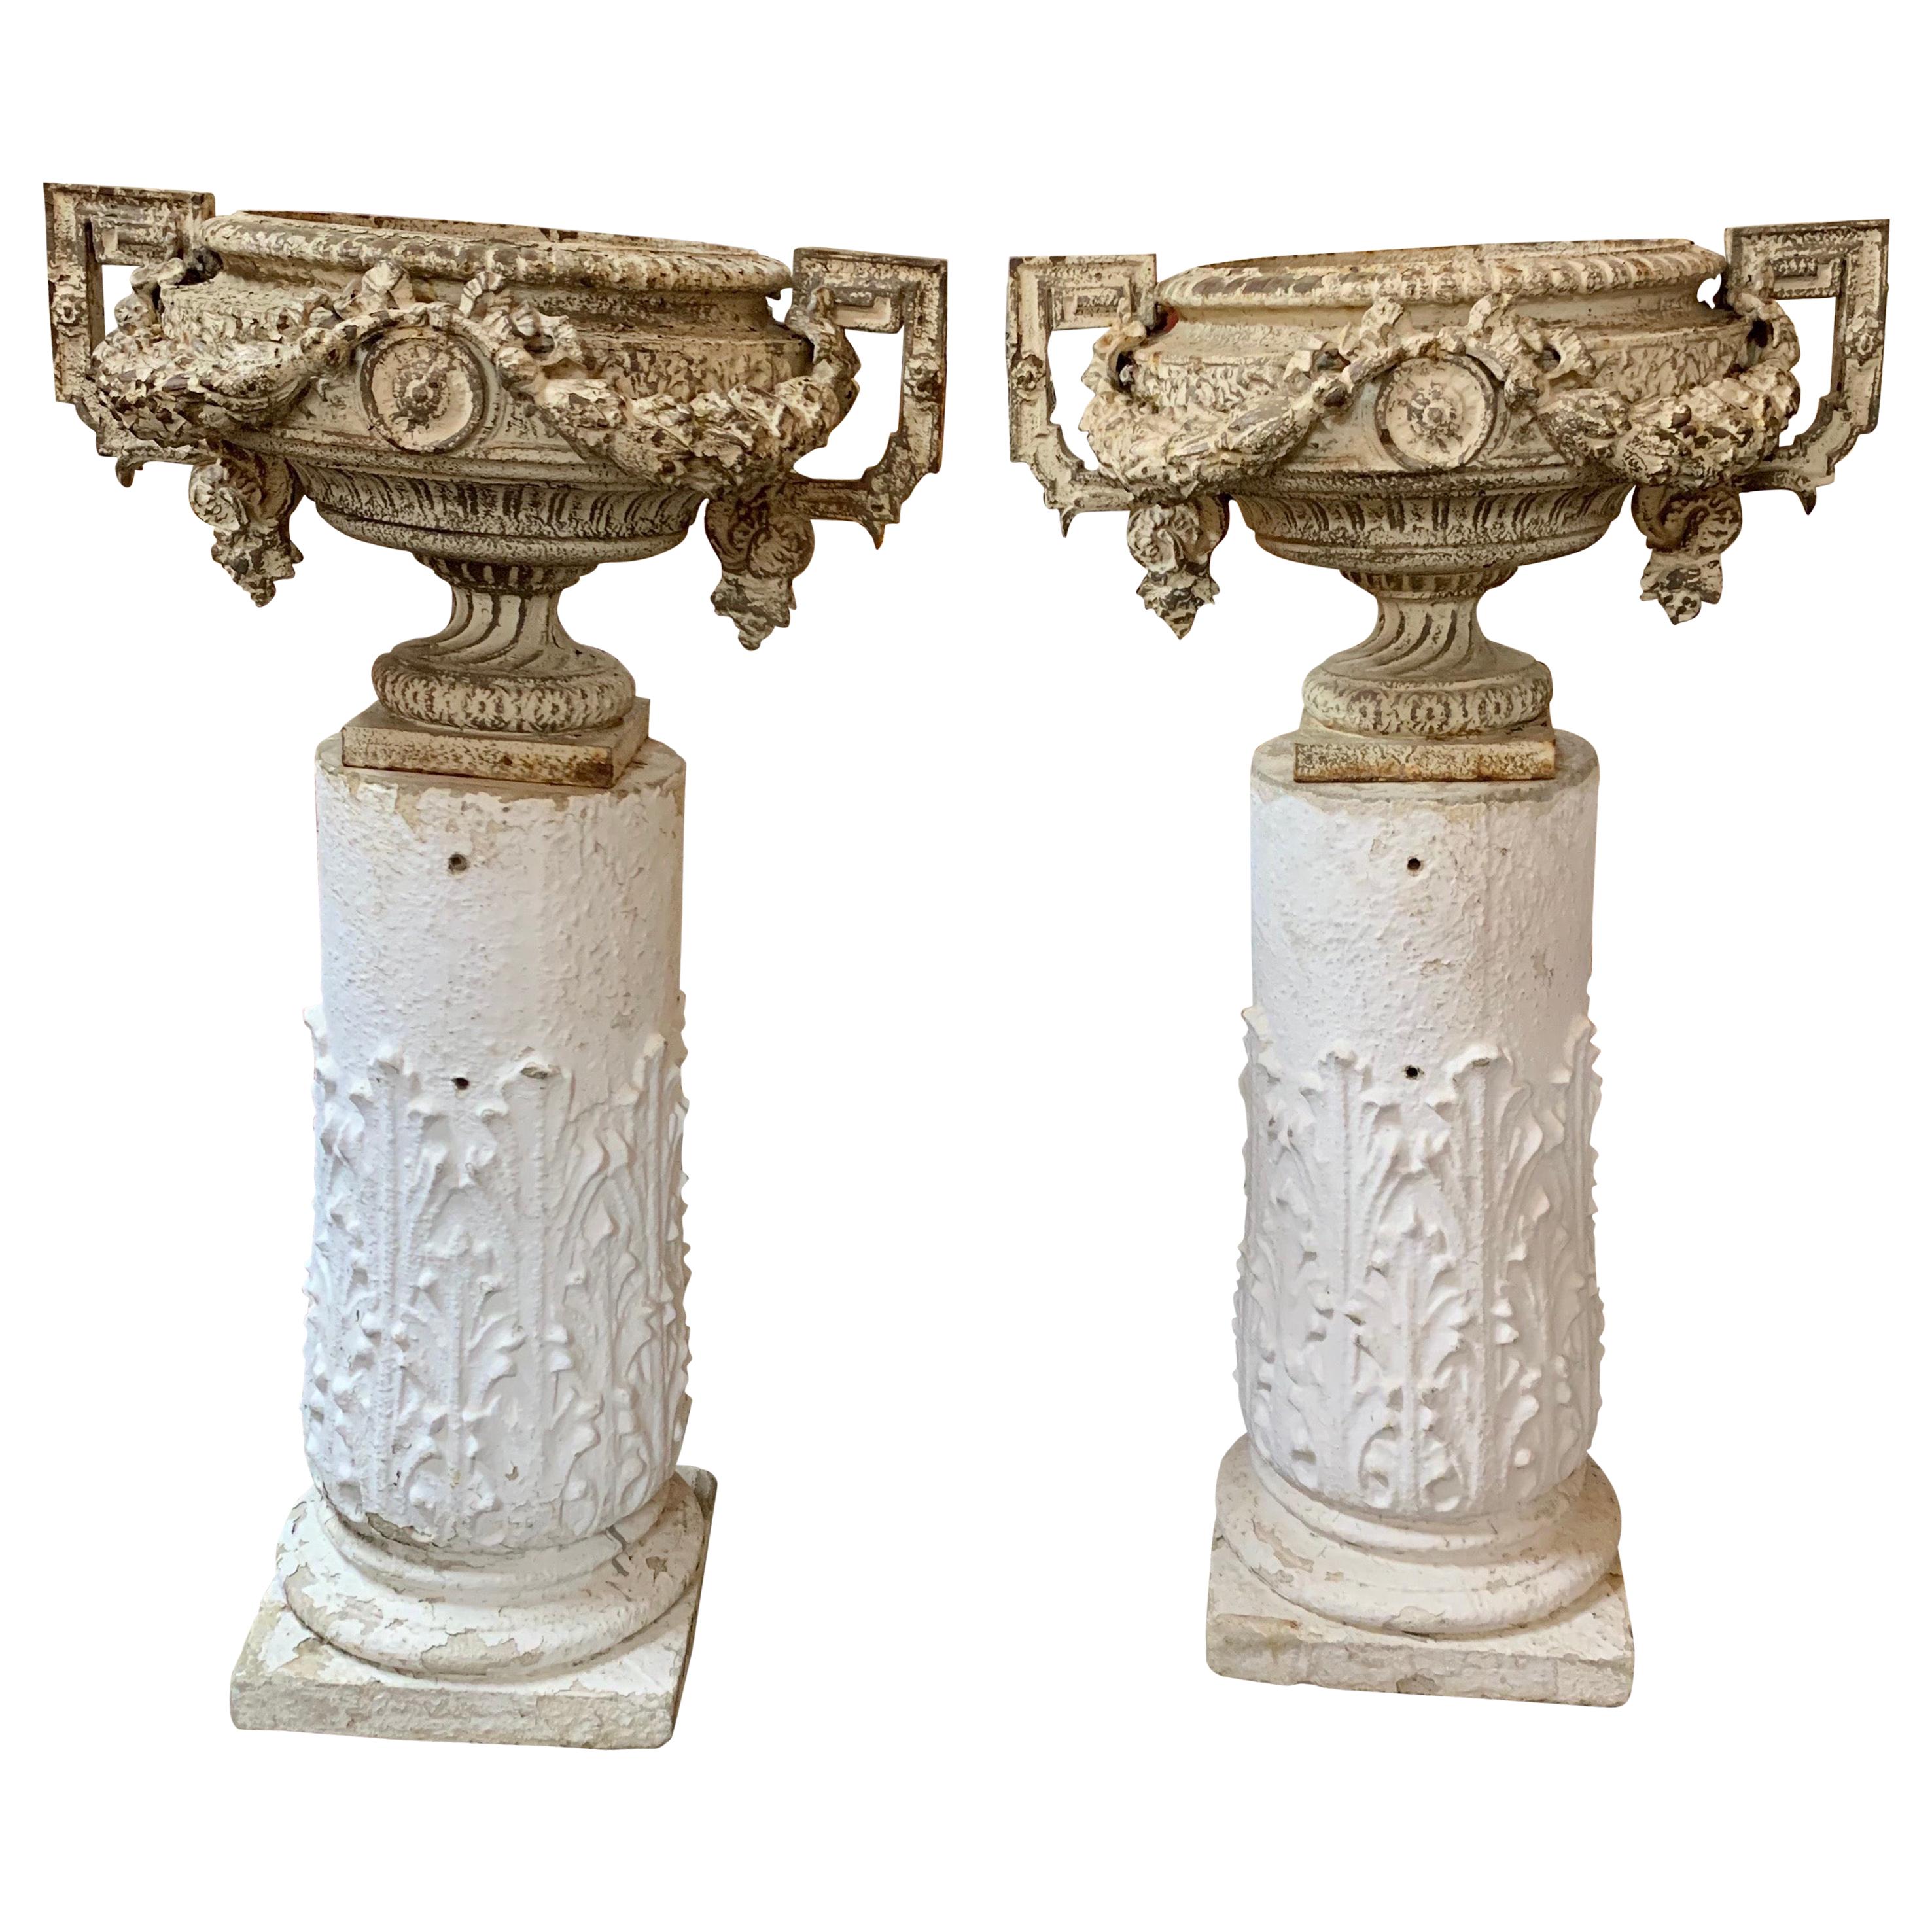 Pair of 18th Century French Iron Garden Urns on Gesso Pedestal Bases